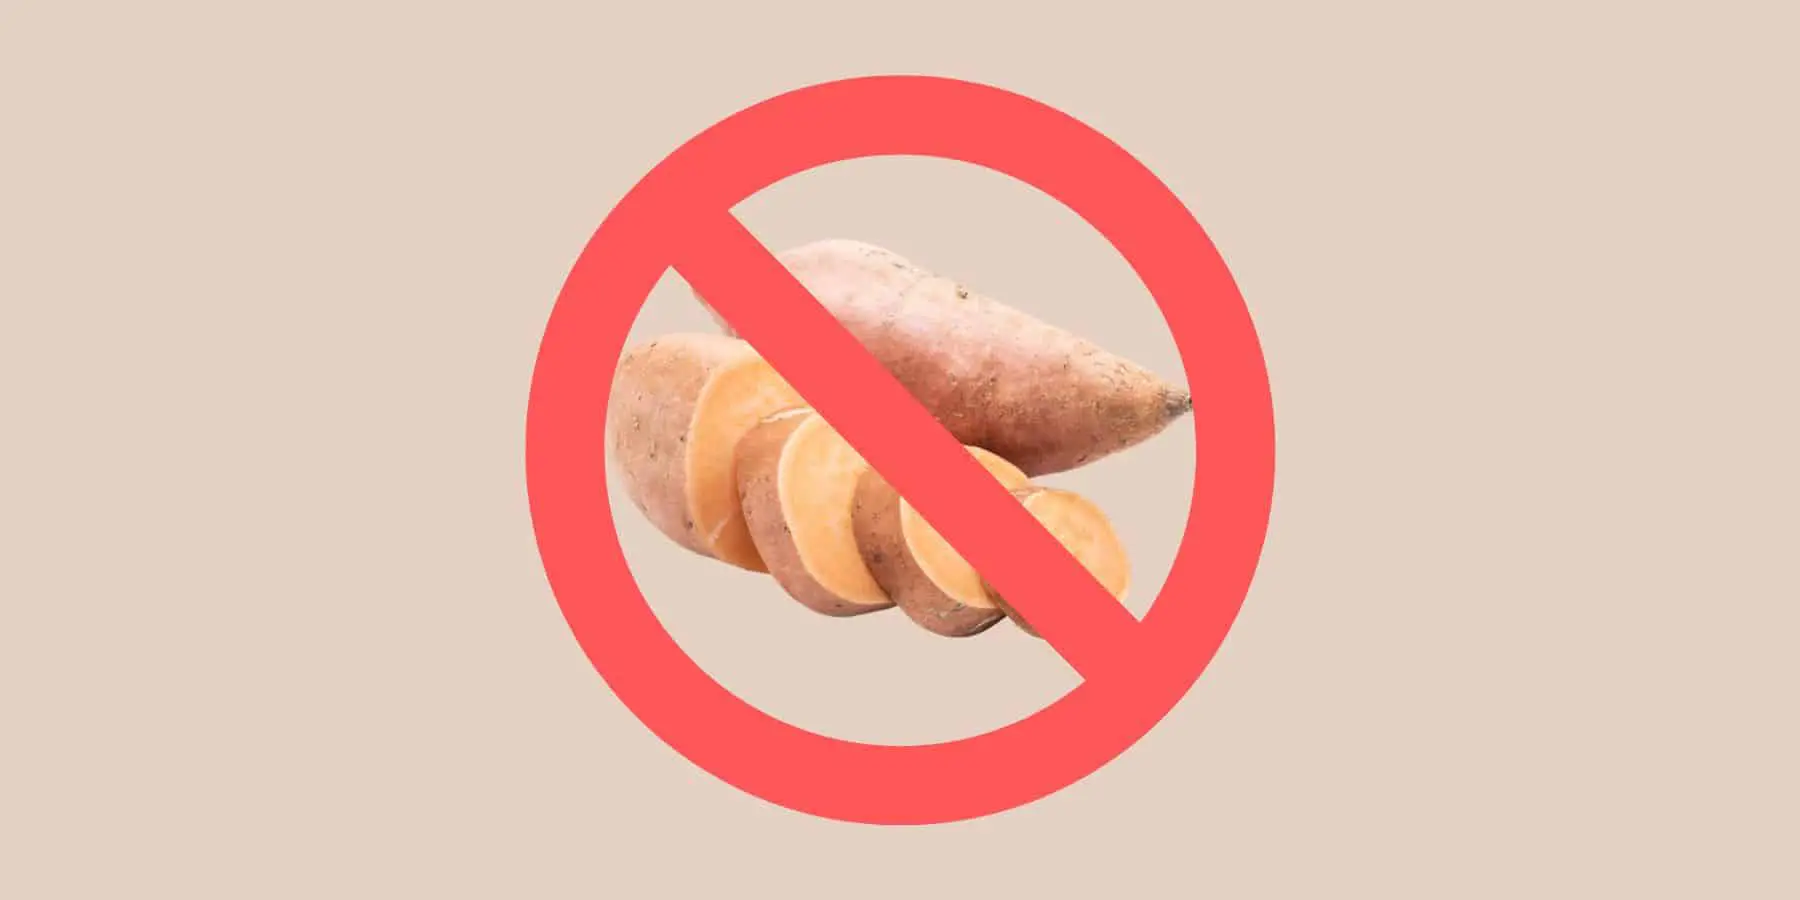 A whole sweet potato and a sliced sweet potato with a red no / prohibited sign for blog post about sweet potato allergy